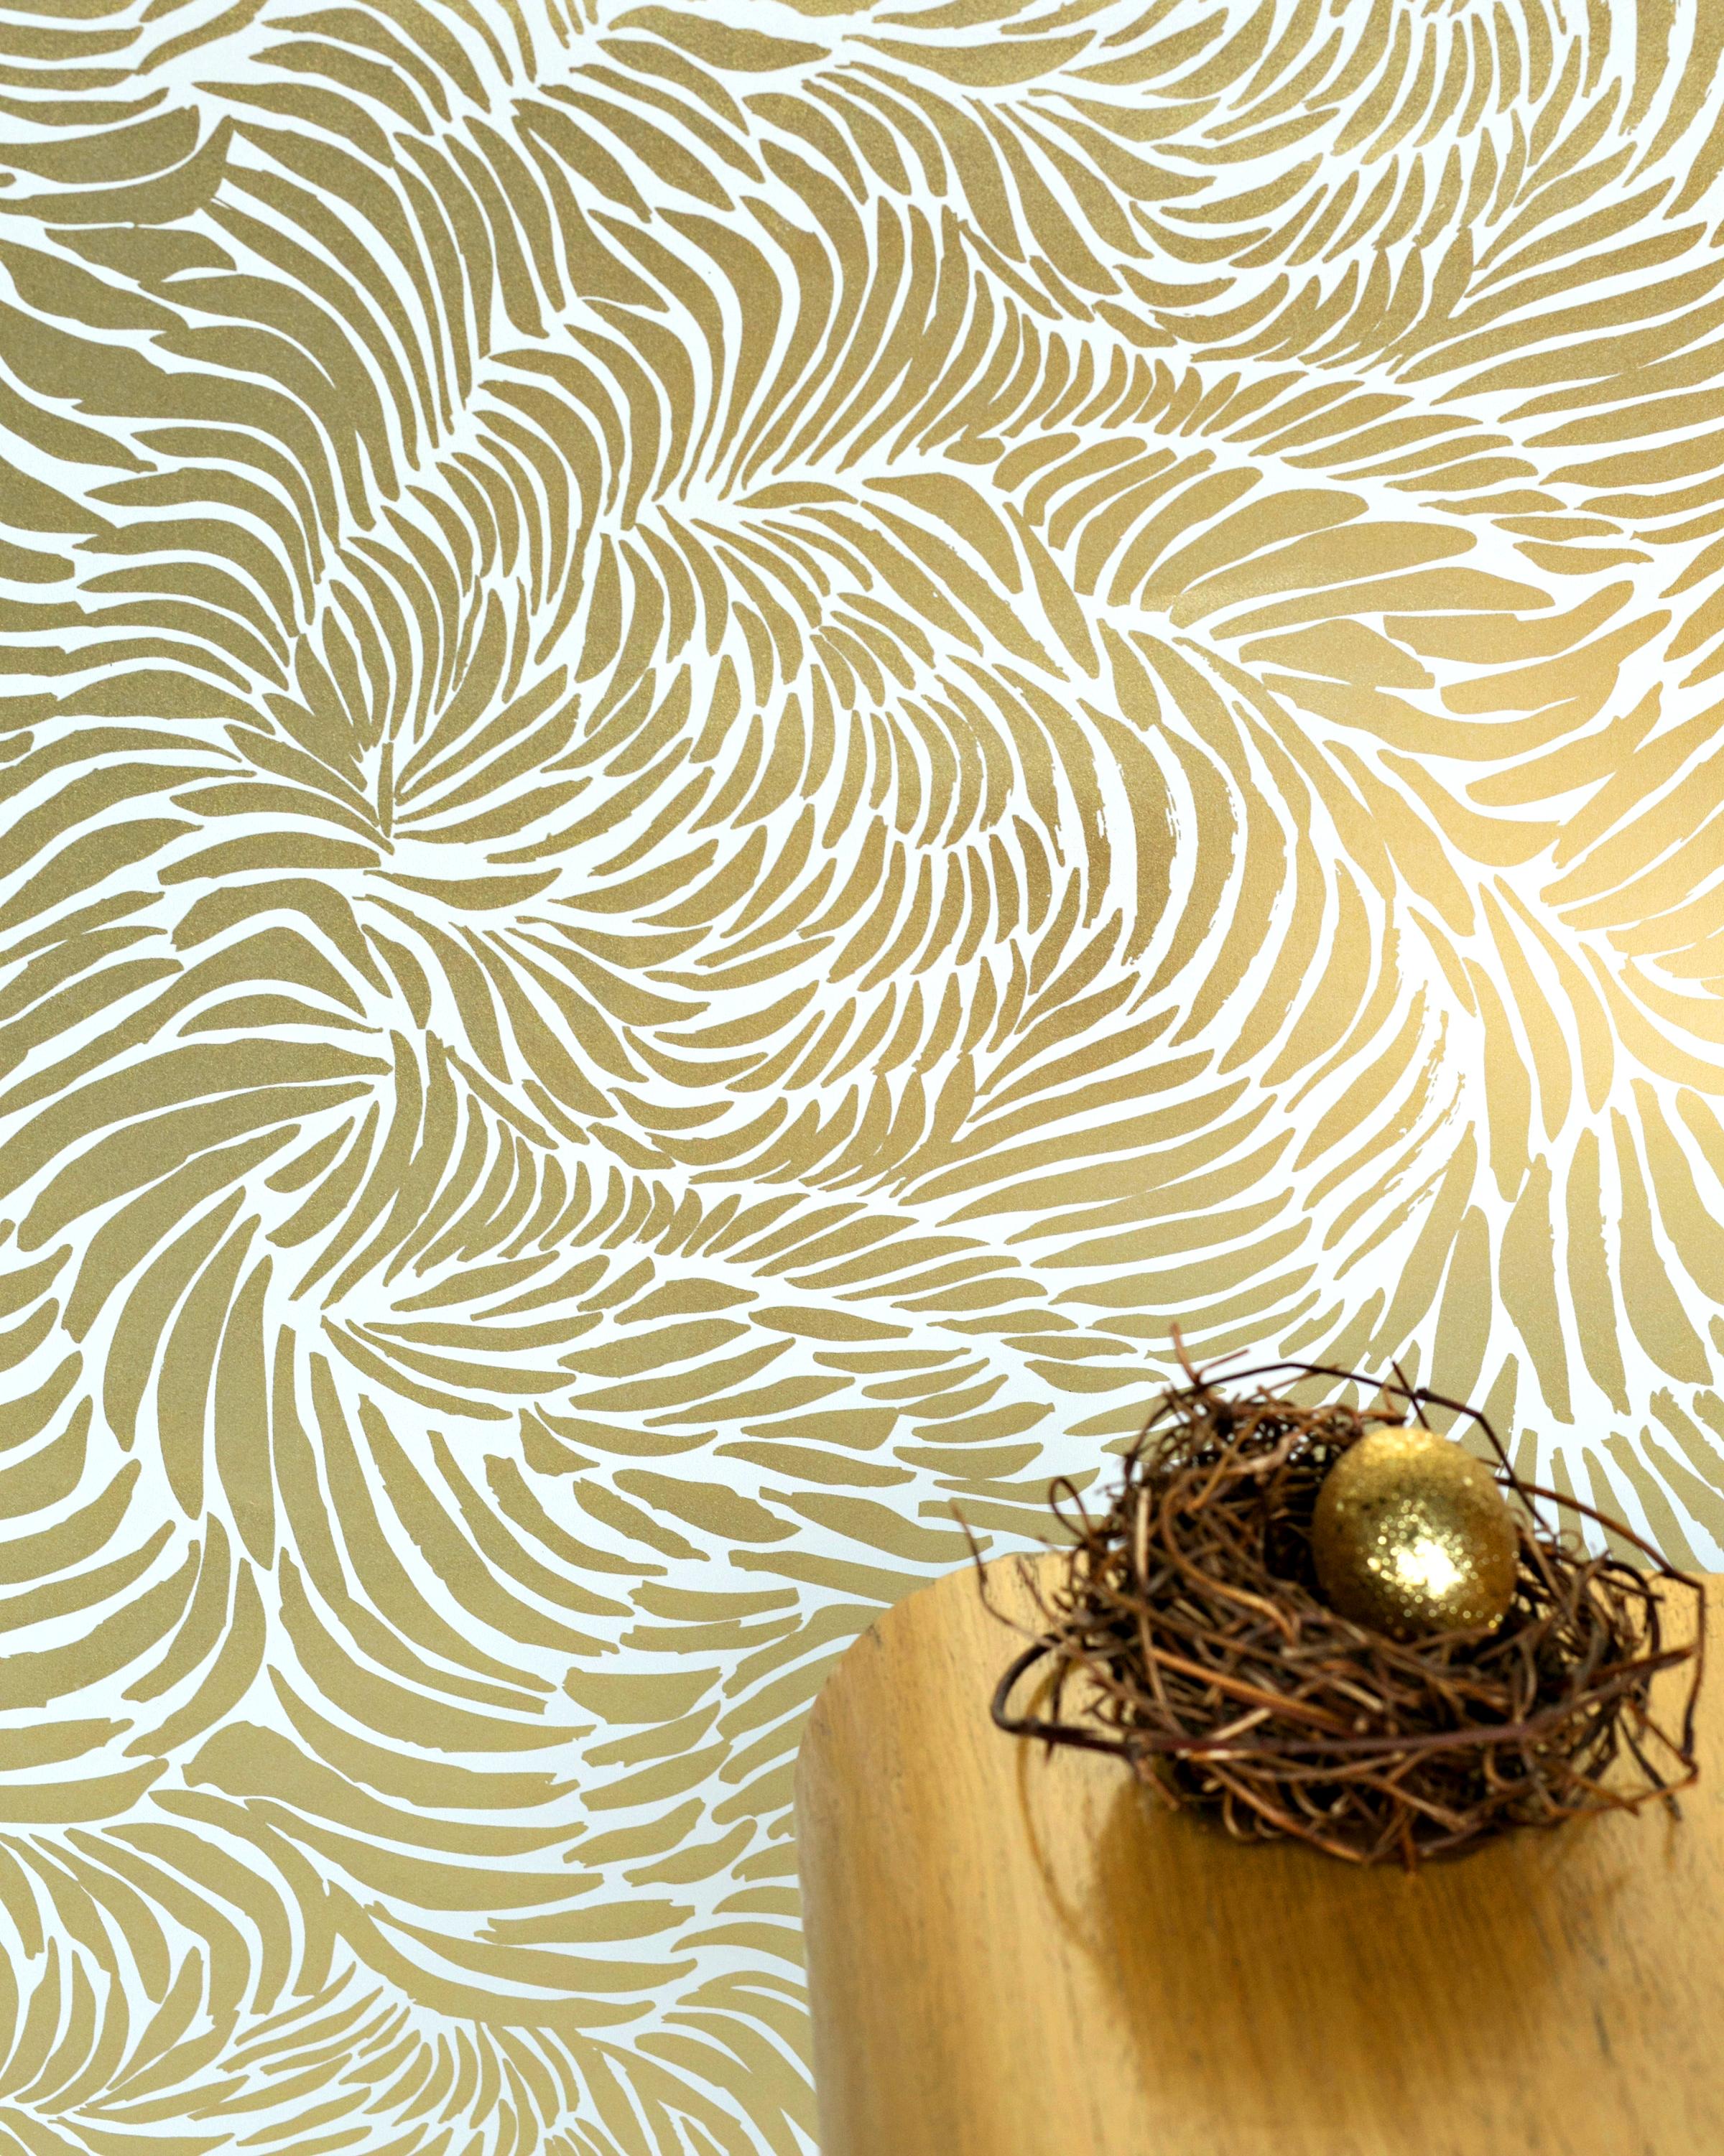 American Hand-Screened Plume Wallpaper in Rich Gold Colorway For Sale